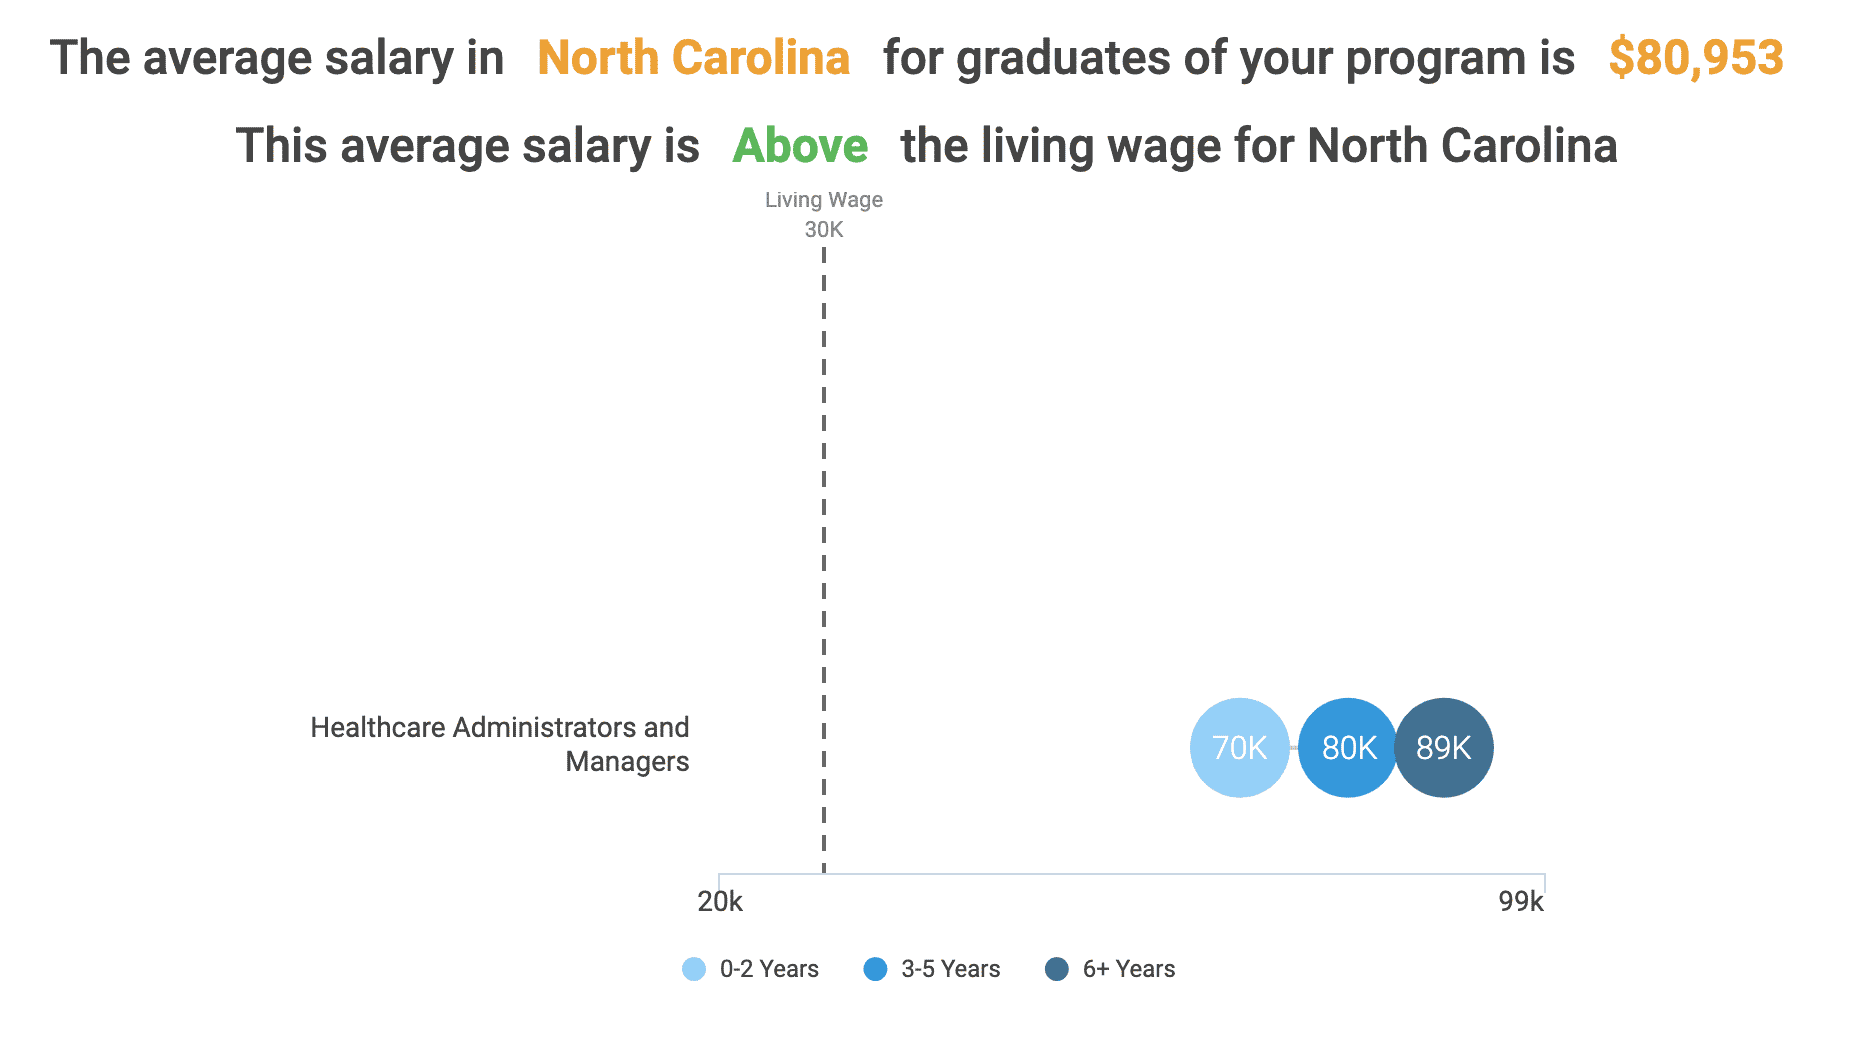 The average salary in North Carolina as health care administrators is $80,953 (as of 2018). this average salary is above the living wage for North Carolina